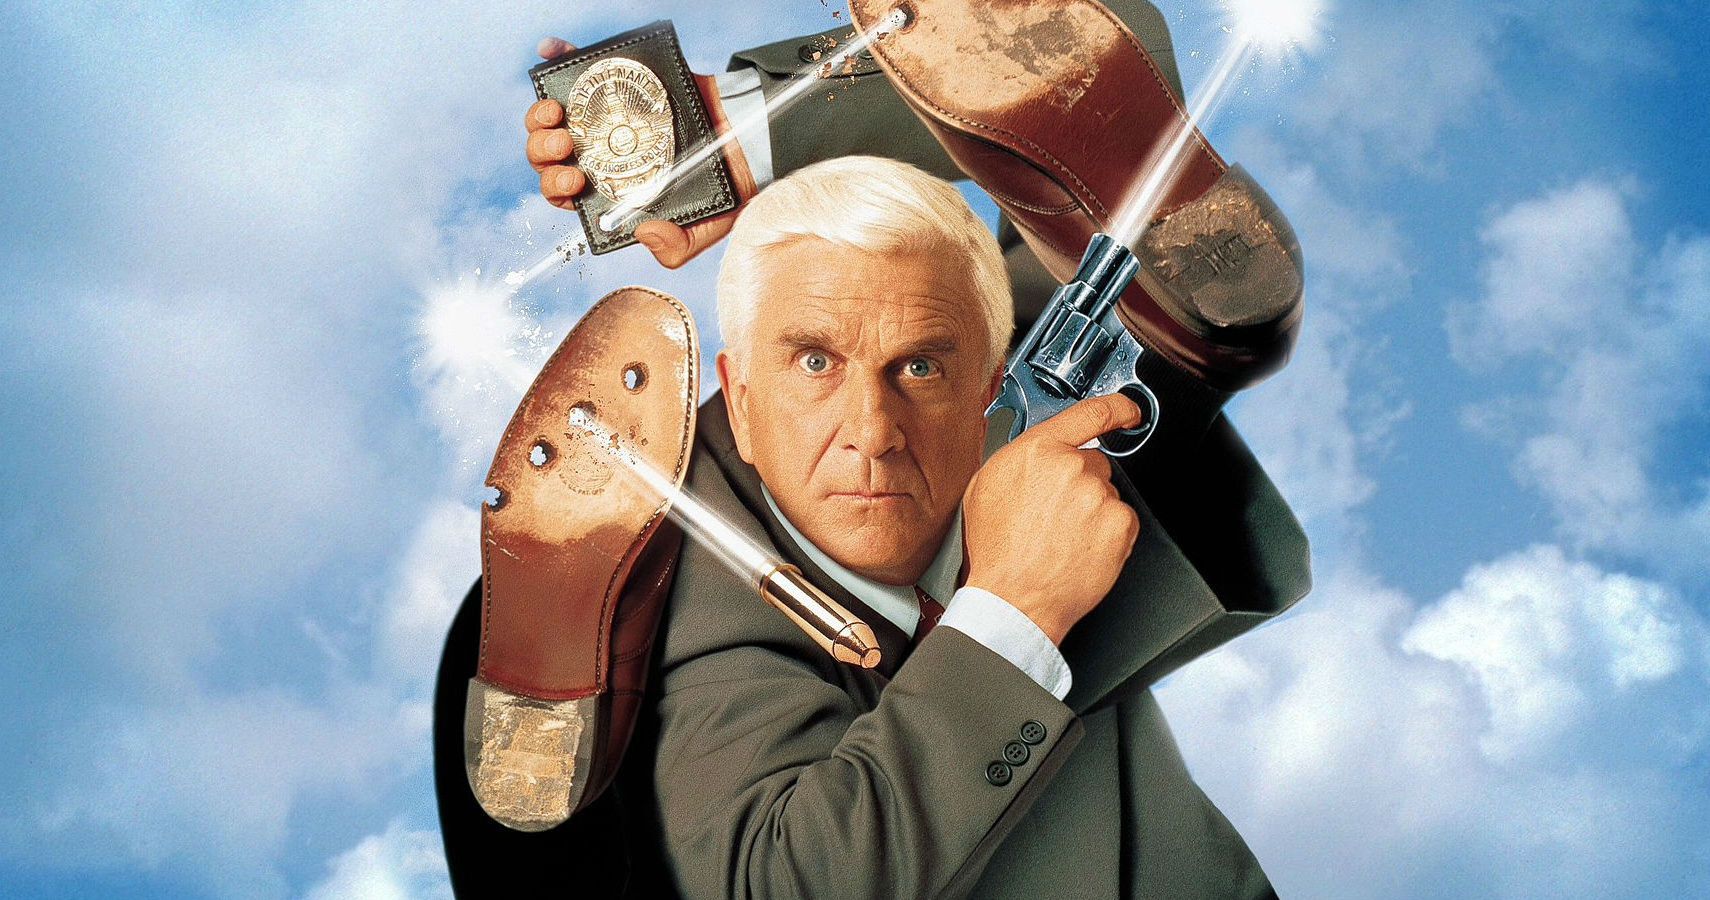 14 Fun Facts About The Naked Gun